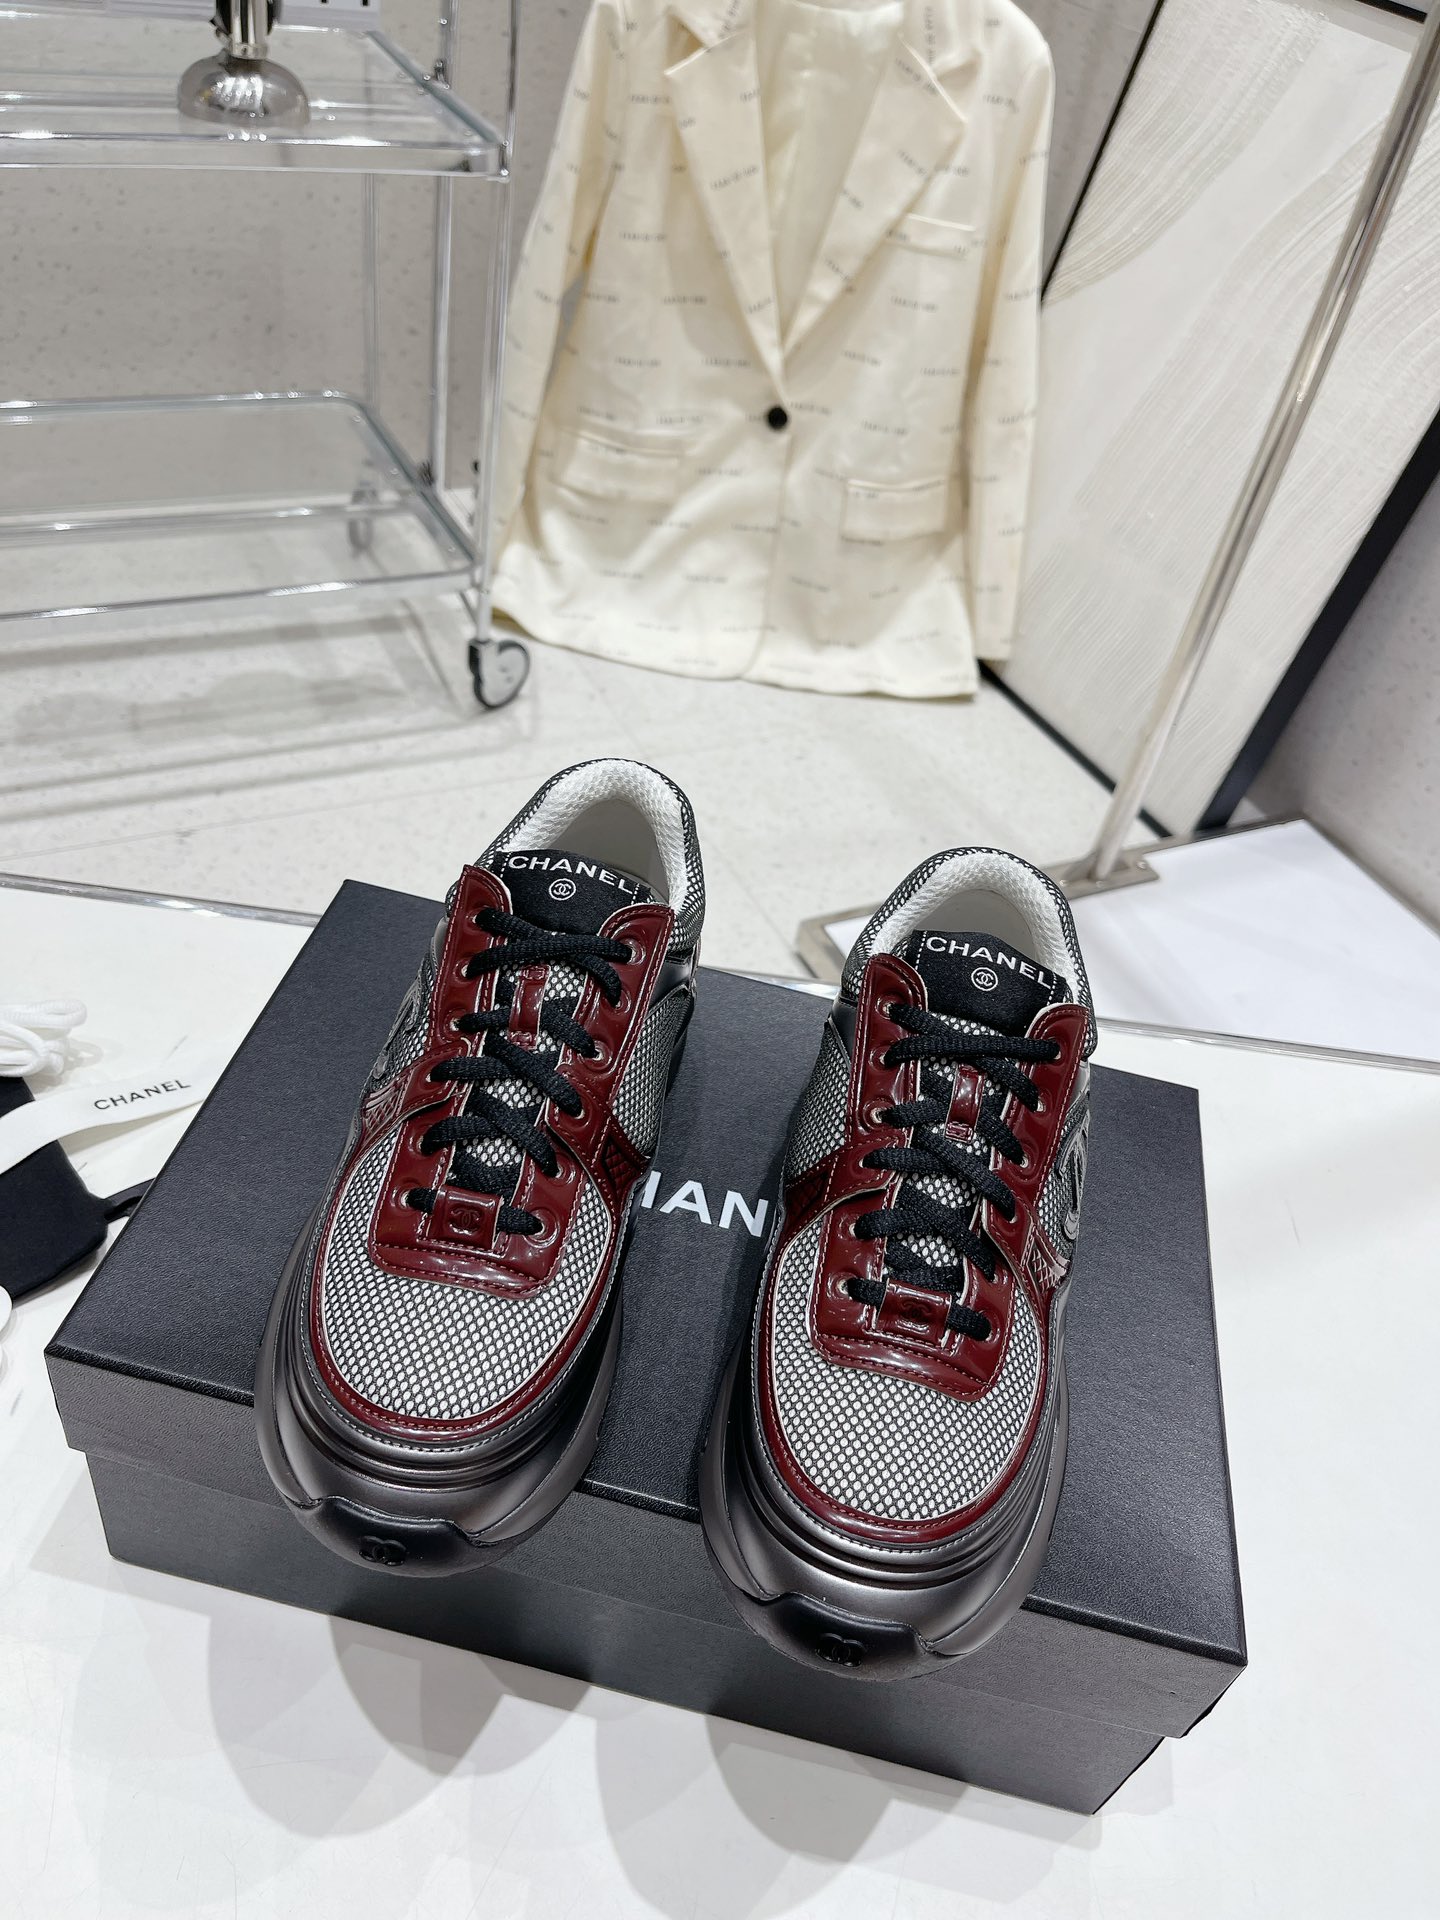 Chanel High
 Shoes Sneakers Found Replica
 Splicing Women Cowhide Casual